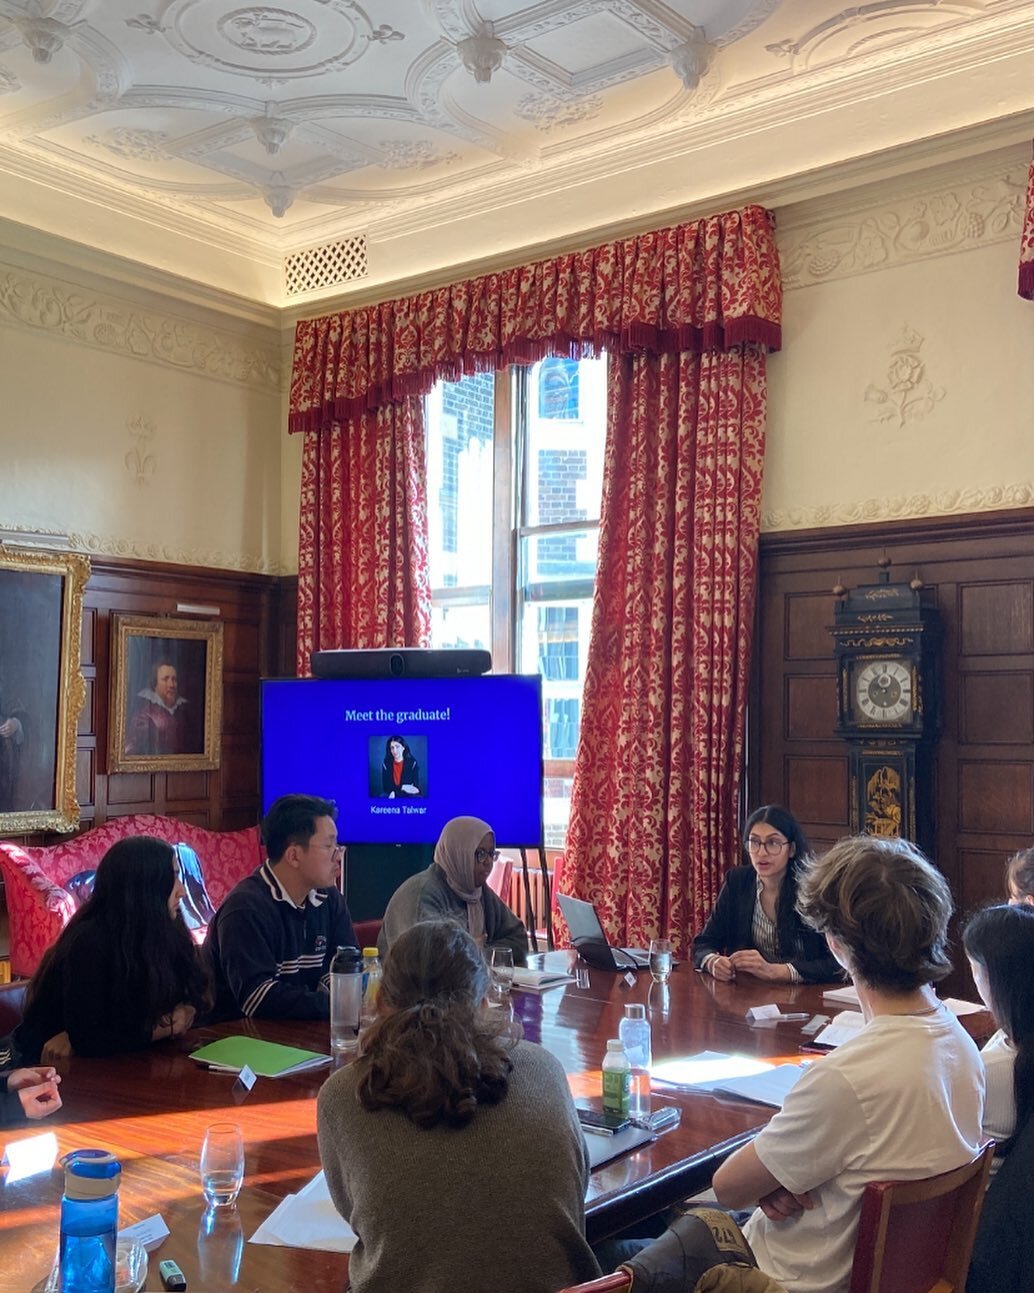 Meet the graduate!

Delighted to have Kareena Talwar sharing her journey to the Bar!

Our students enjoyed learning more about her recent graduate experiences. The careers focused session ended with a personal statement workshop. 

#middletemple #car